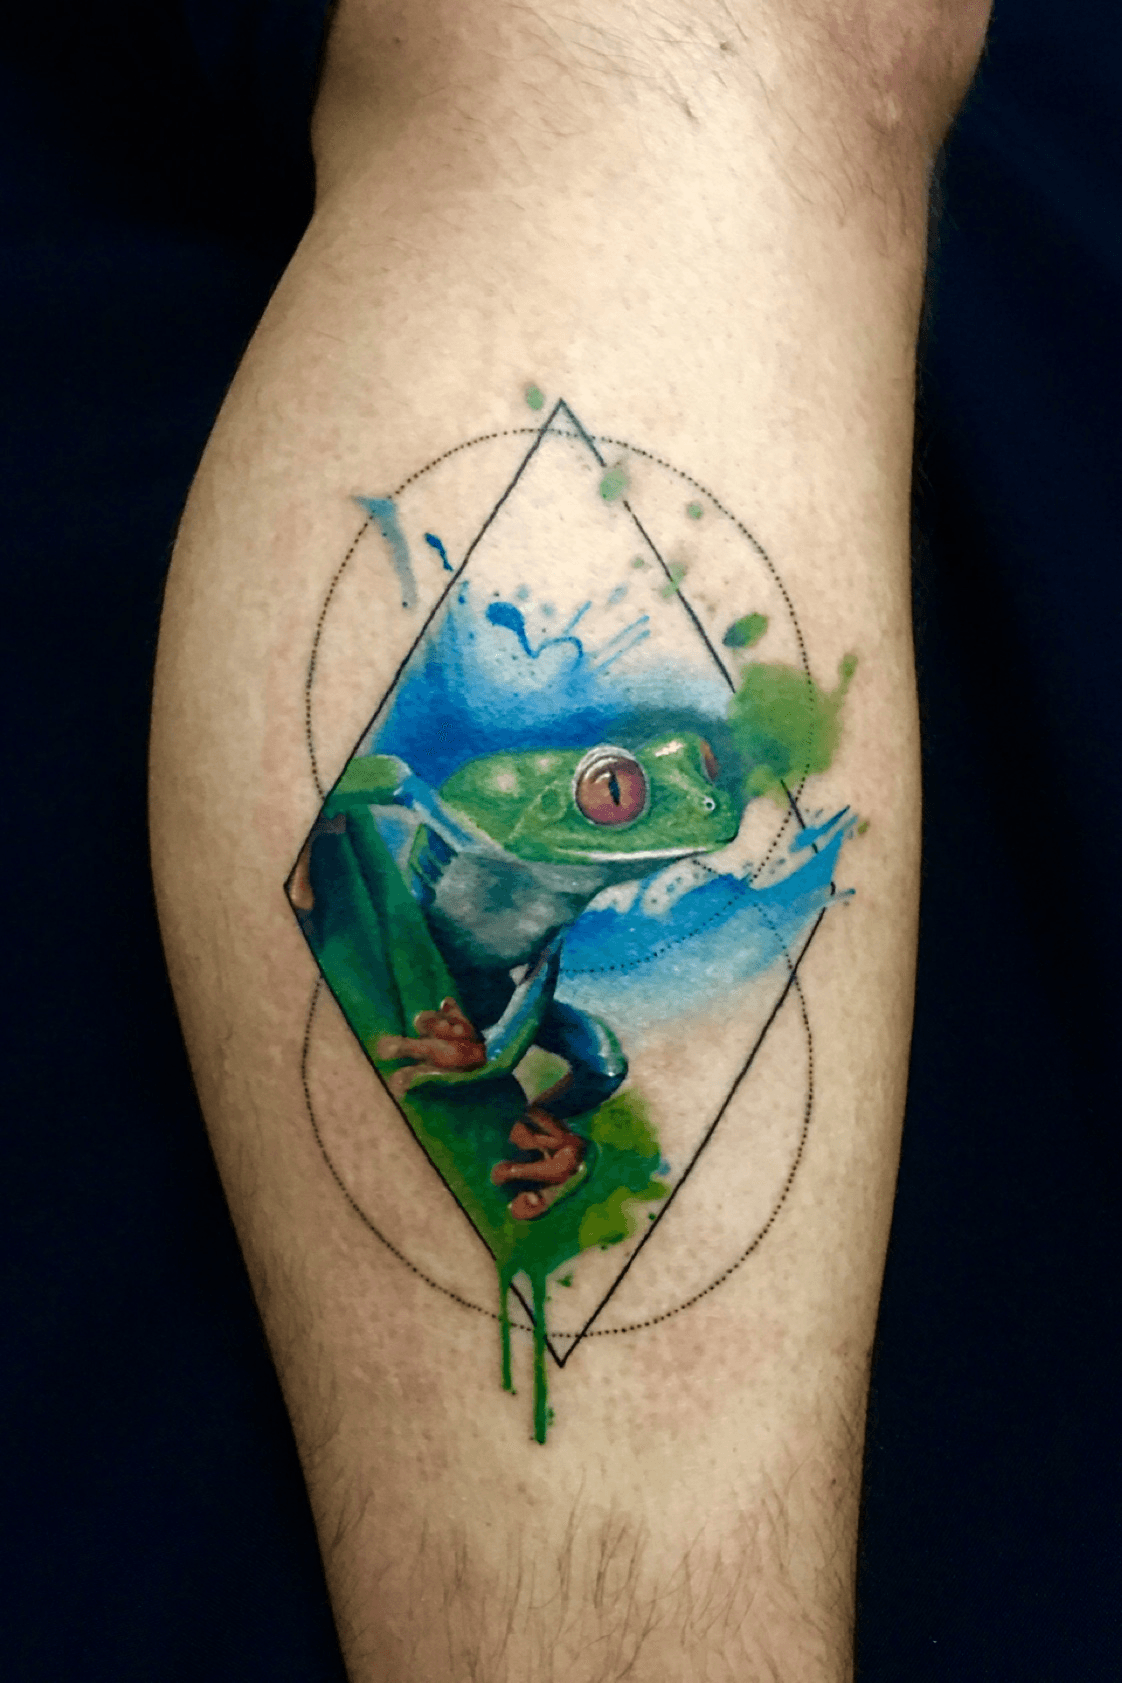 Microrealistic frog tattoo on the ankle